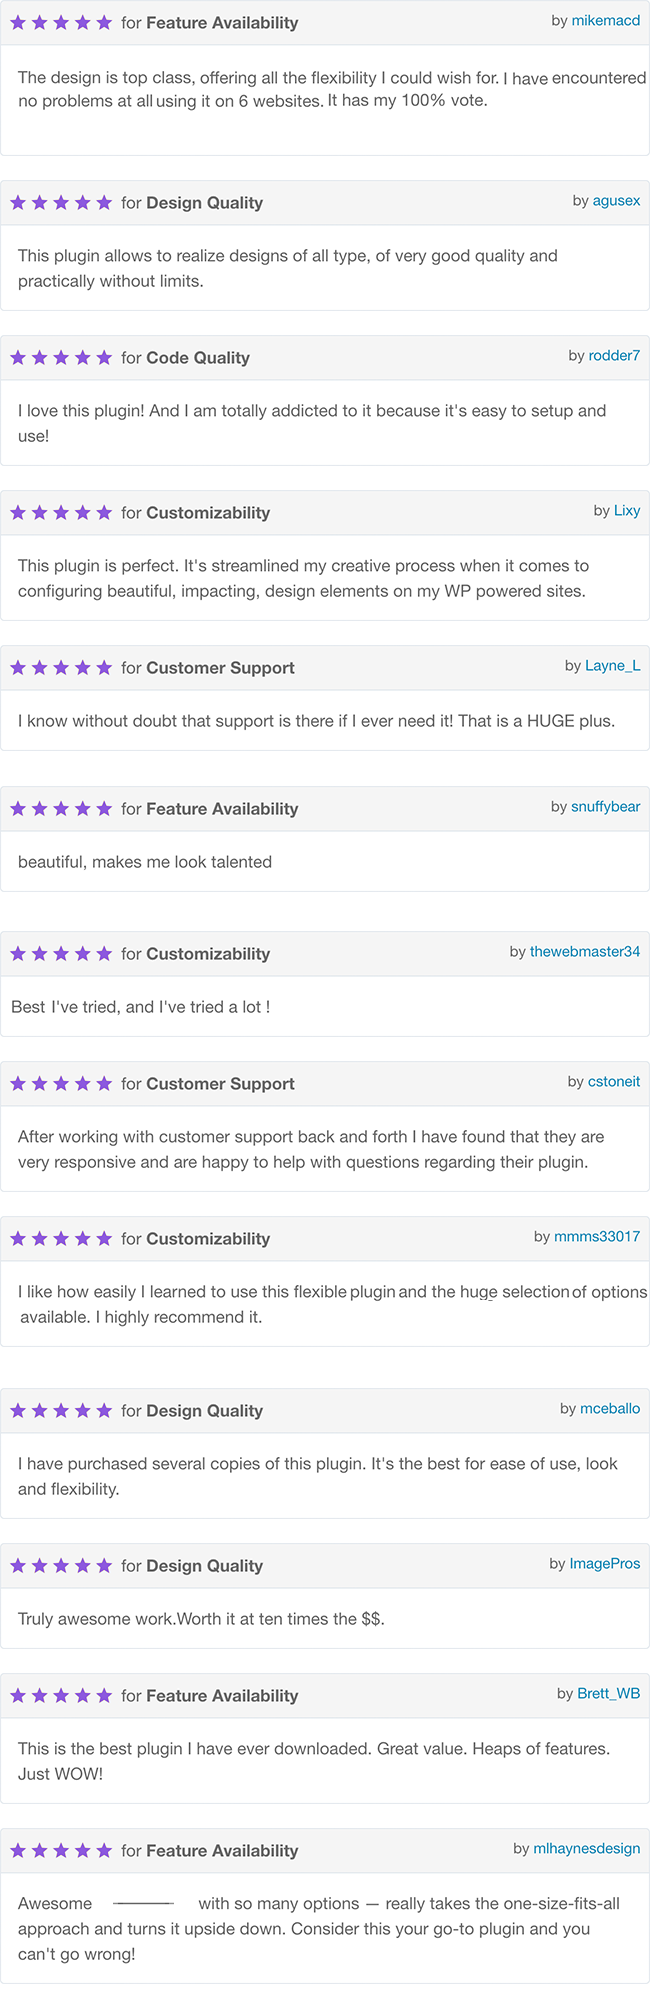 Facebook And Google Reviews System For Businesses Detailed Customers Reviews